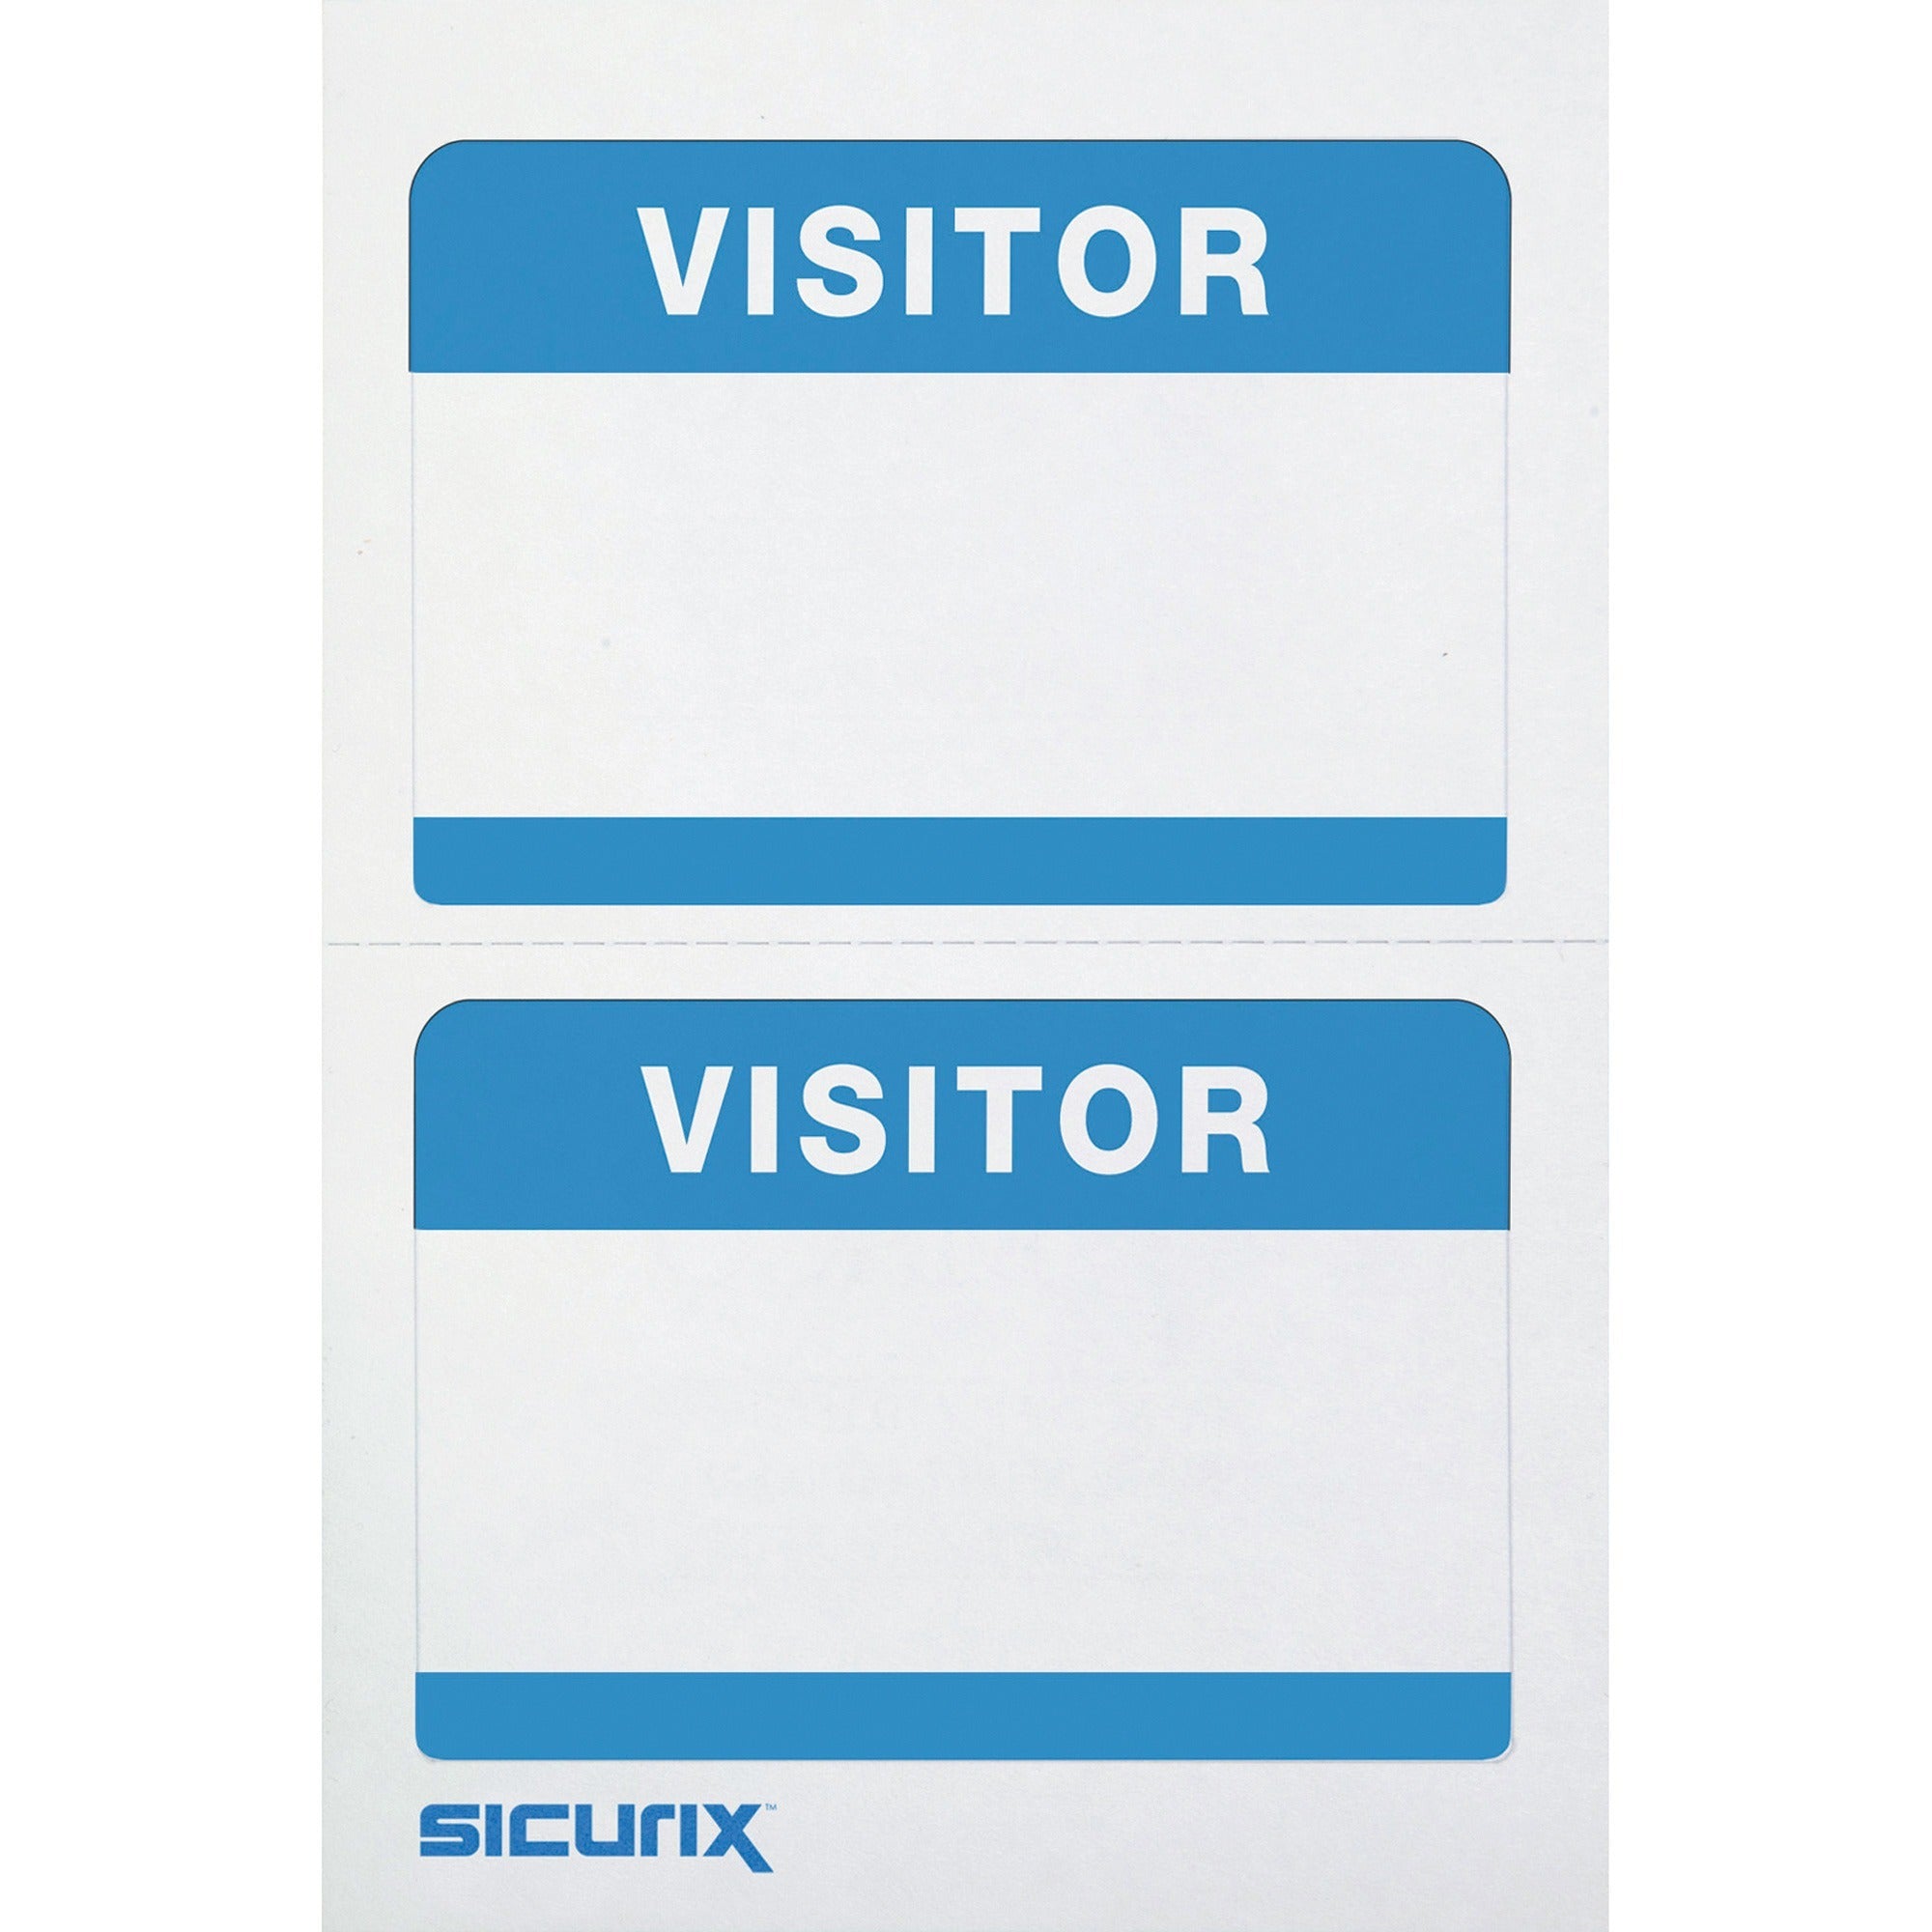 SICURIX Self-adhesive Visitor Badge - 3 1/2" Width x 2 1/4" Length - Removable Adhesive - Rectangle - White, Blue - 100 / Box - Self-adhesive, Easy Peel - 